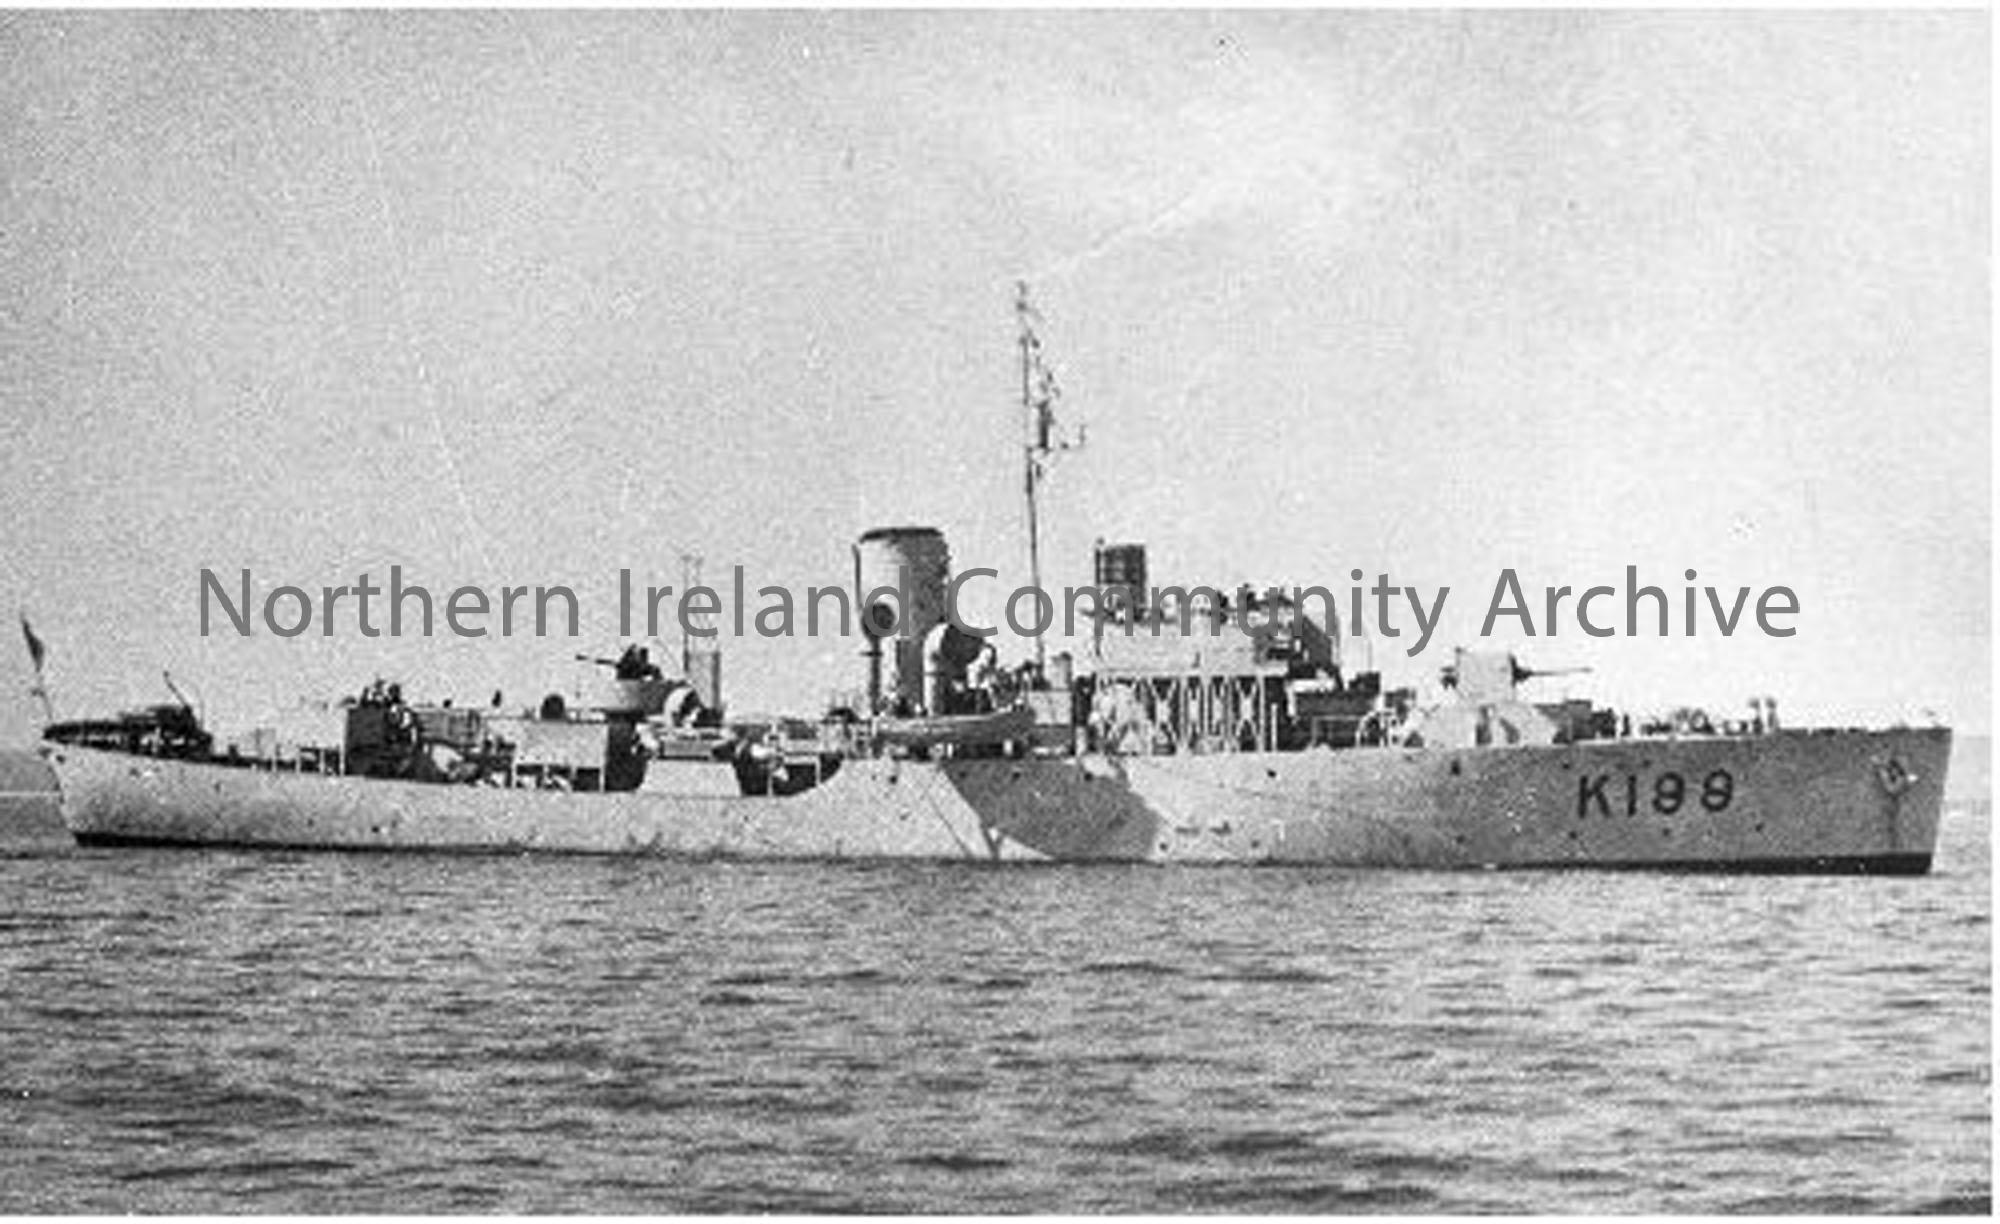 HMS Fritillary
K 199 
Ship number 1107
Launched: 22 Jul, 1941 
Commissioned: 1 Nov, 1941 
 (2092)